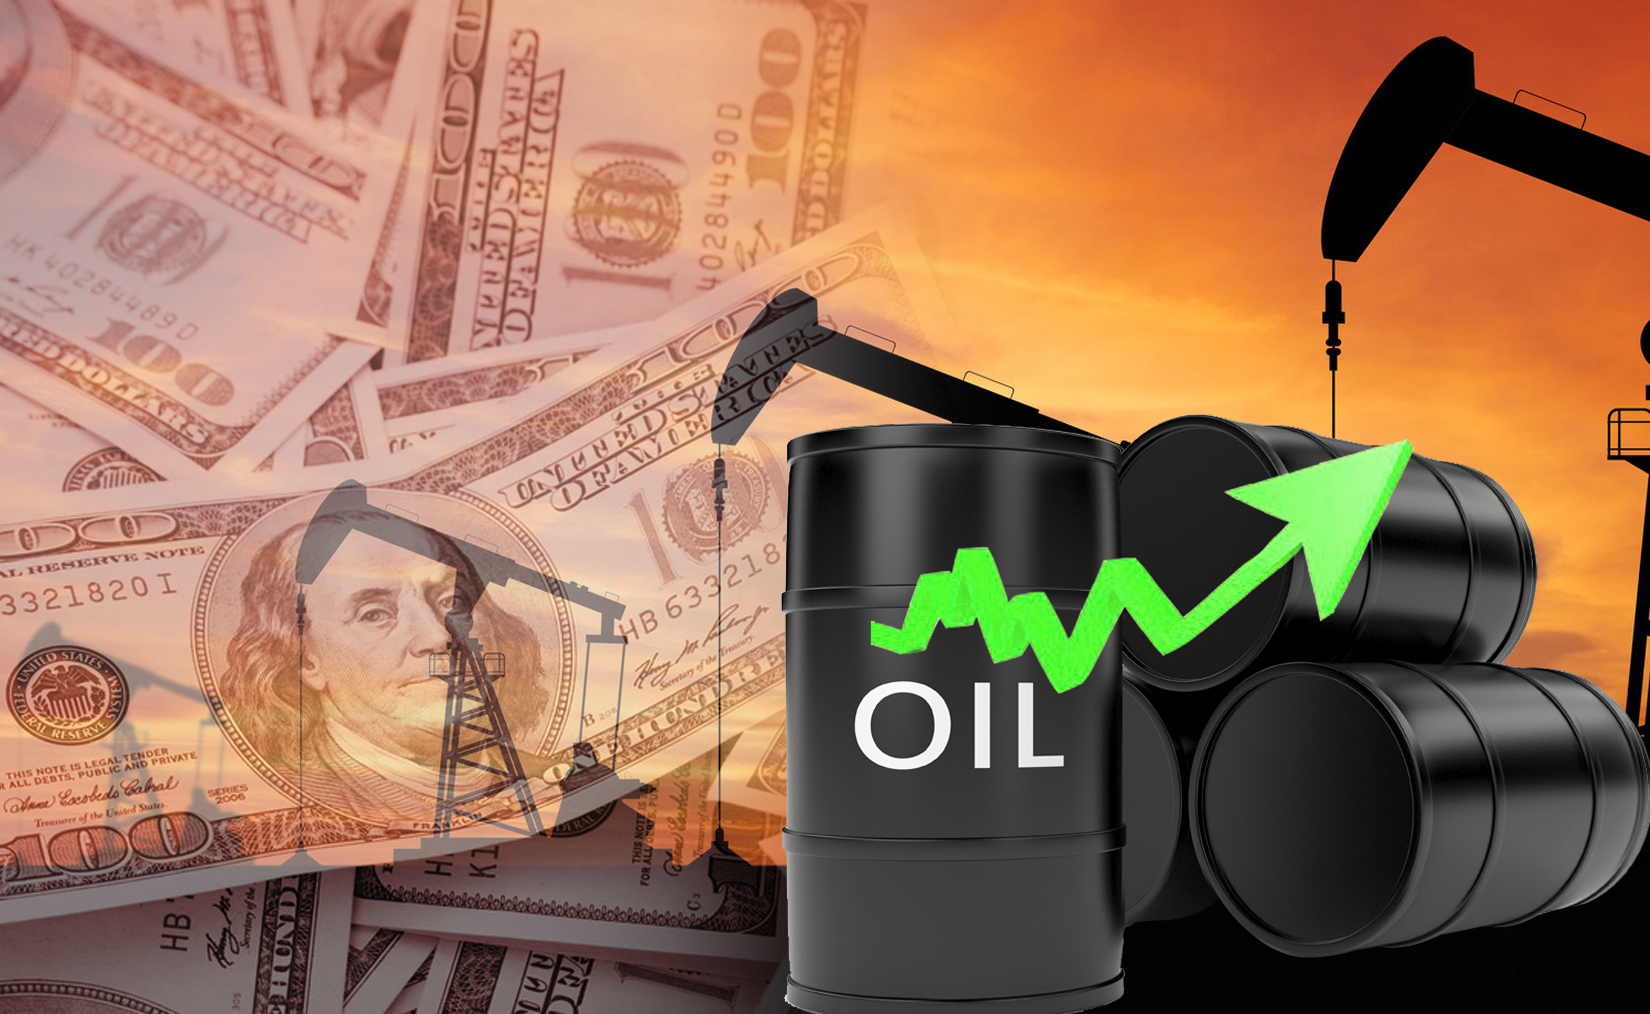 Kuwaiti oil price up 26 cents to stand at USD 58.80 per barrel                                                                                                                                                                                            